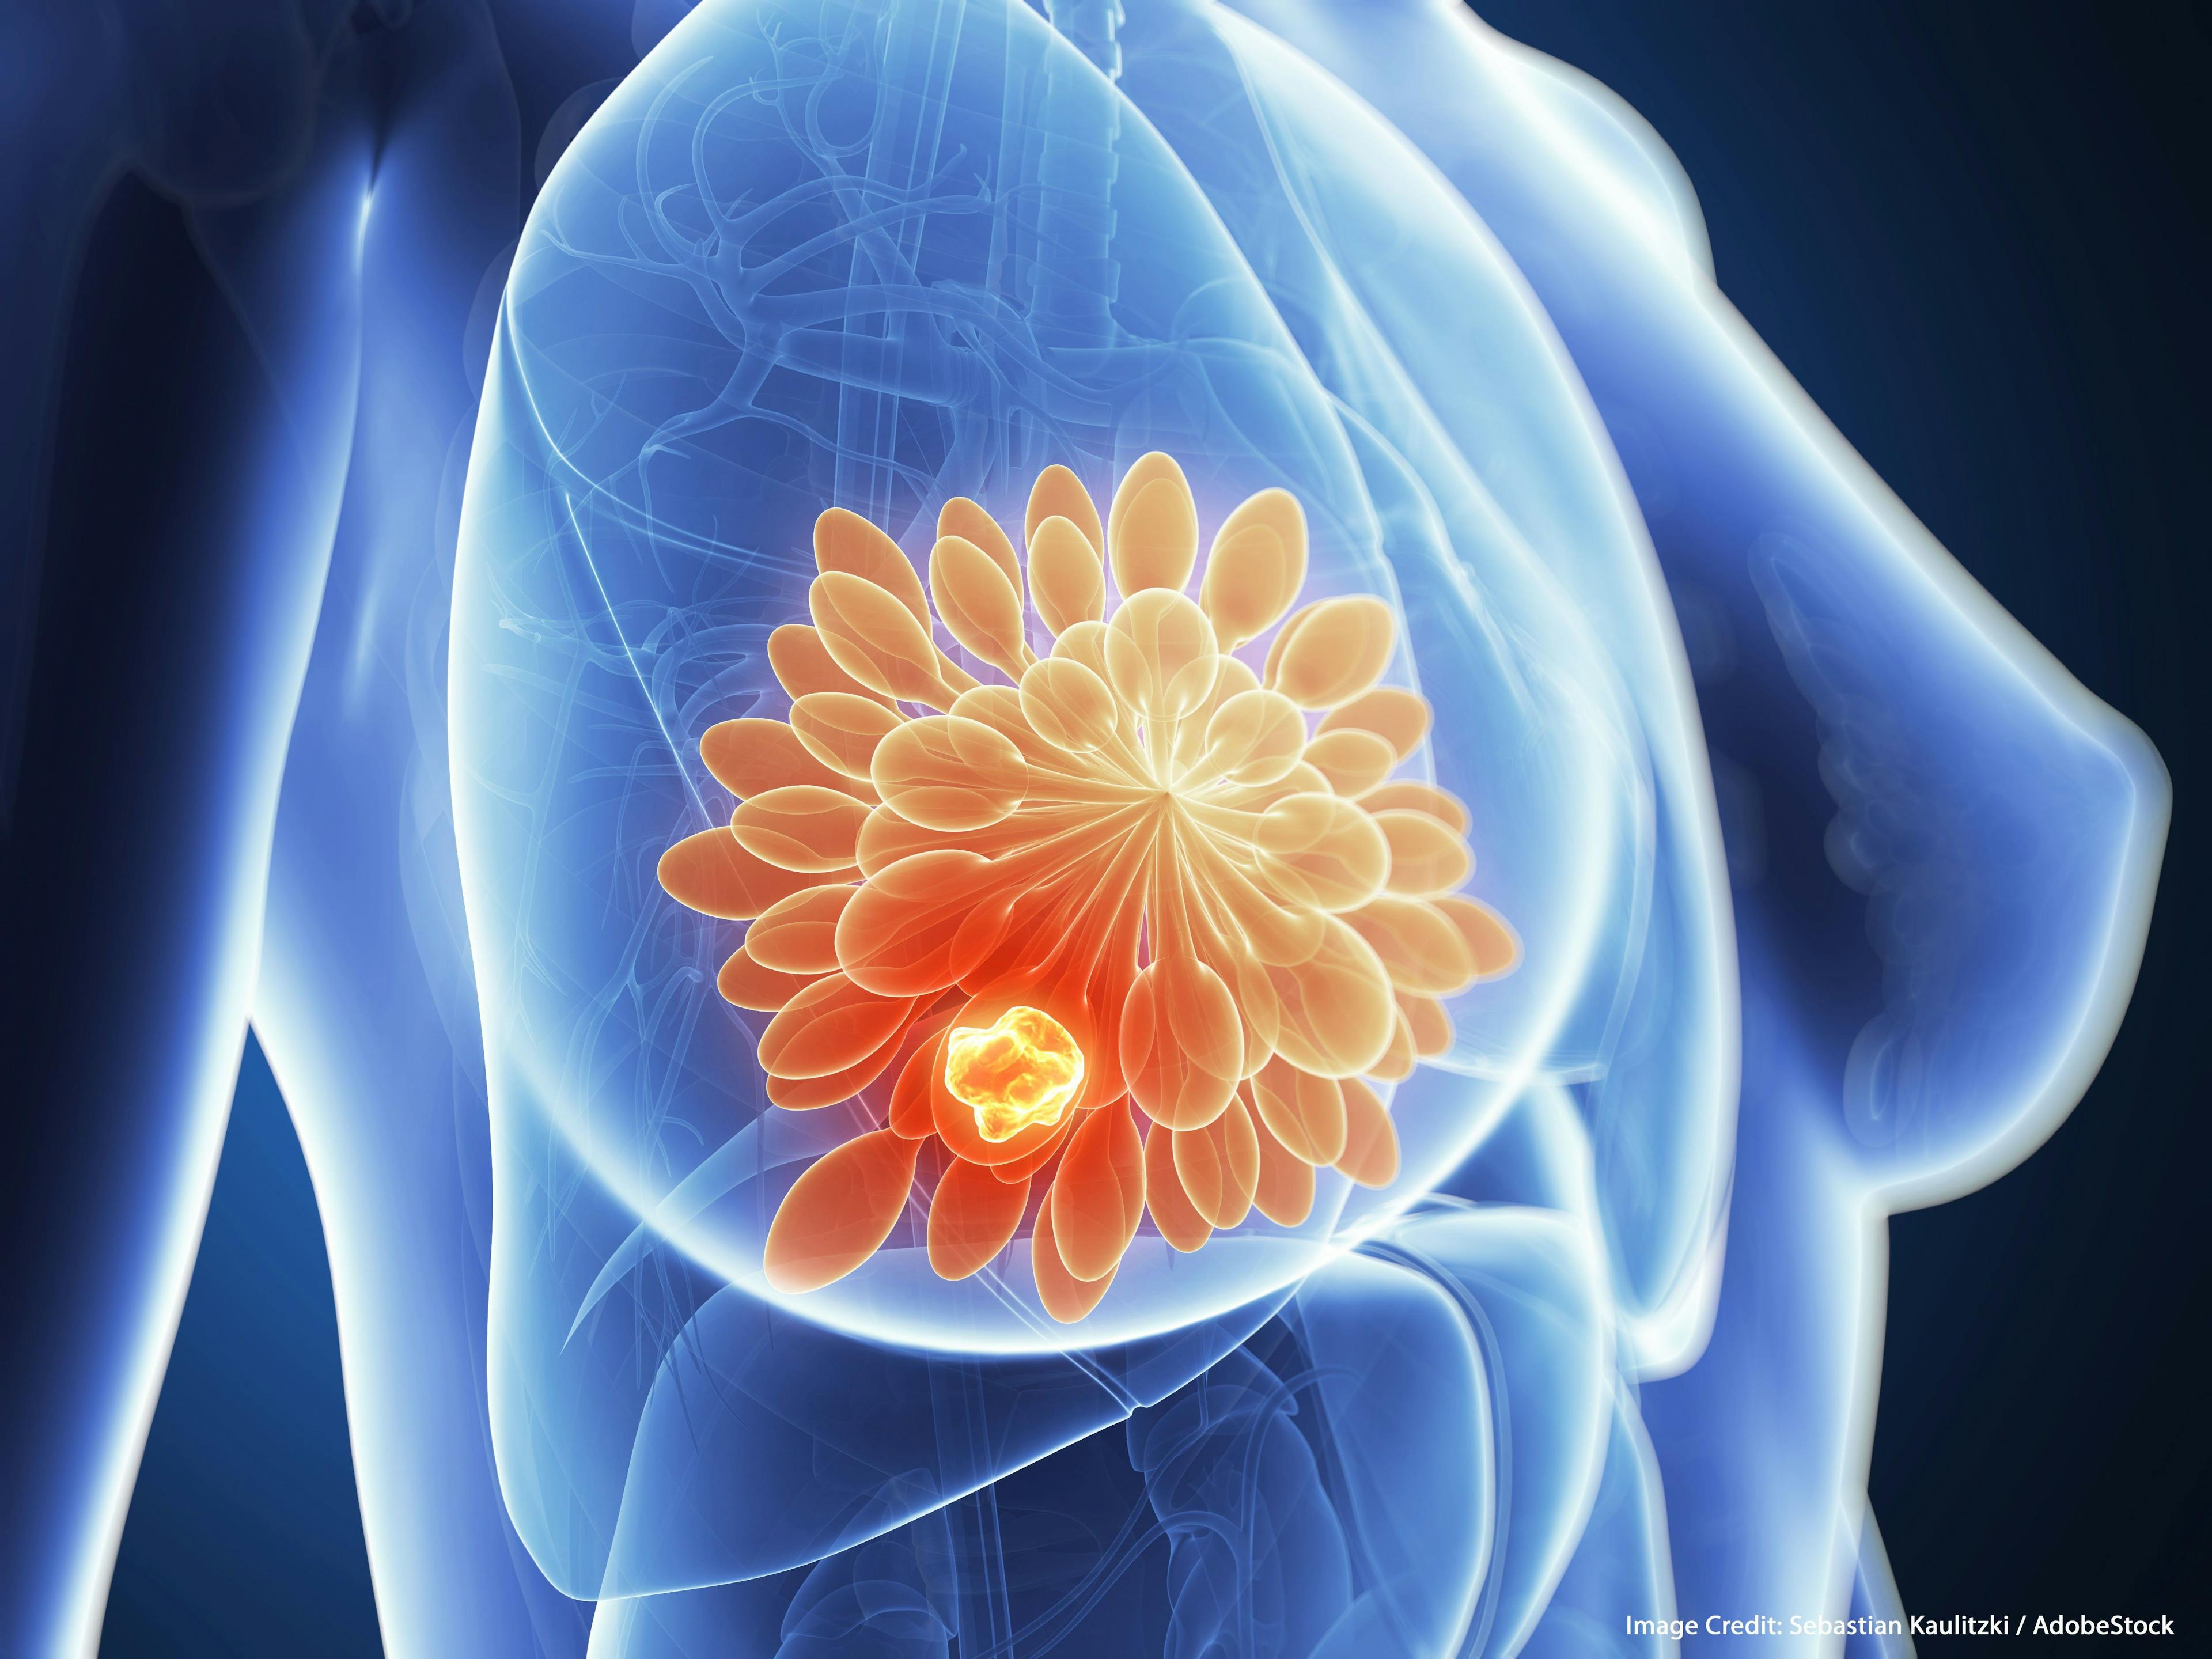 Extending Adjuvant Endocrine Therapy in Breast Cancer: Who, What, Why?